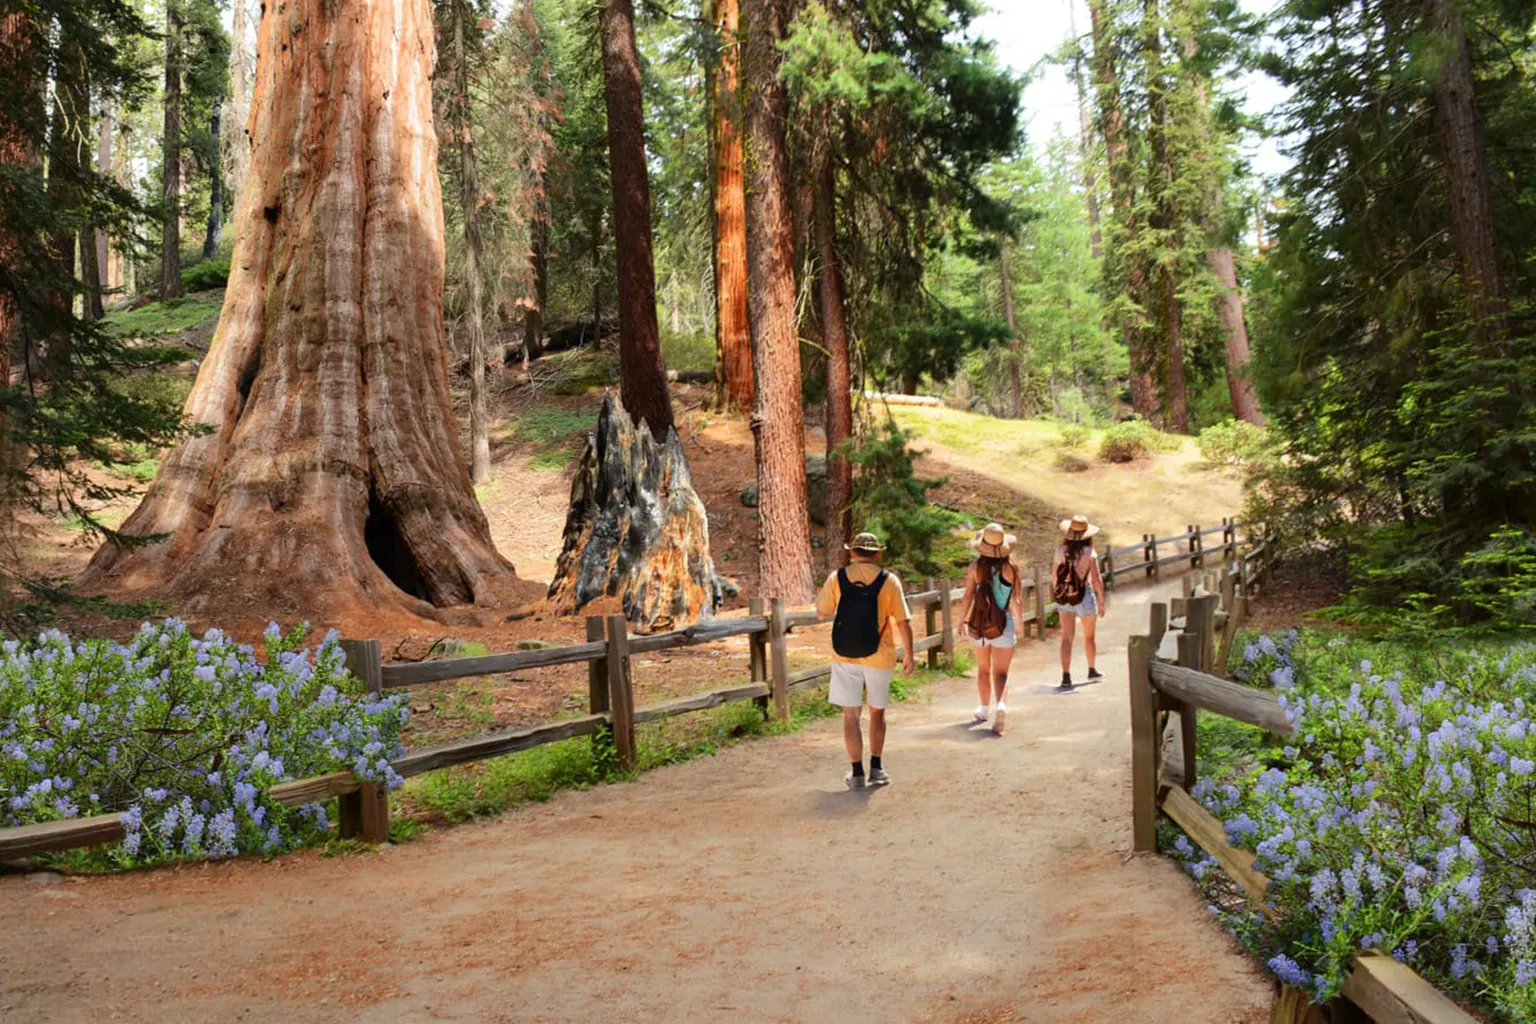 4) Sequoia and Kings Canyon National Parks